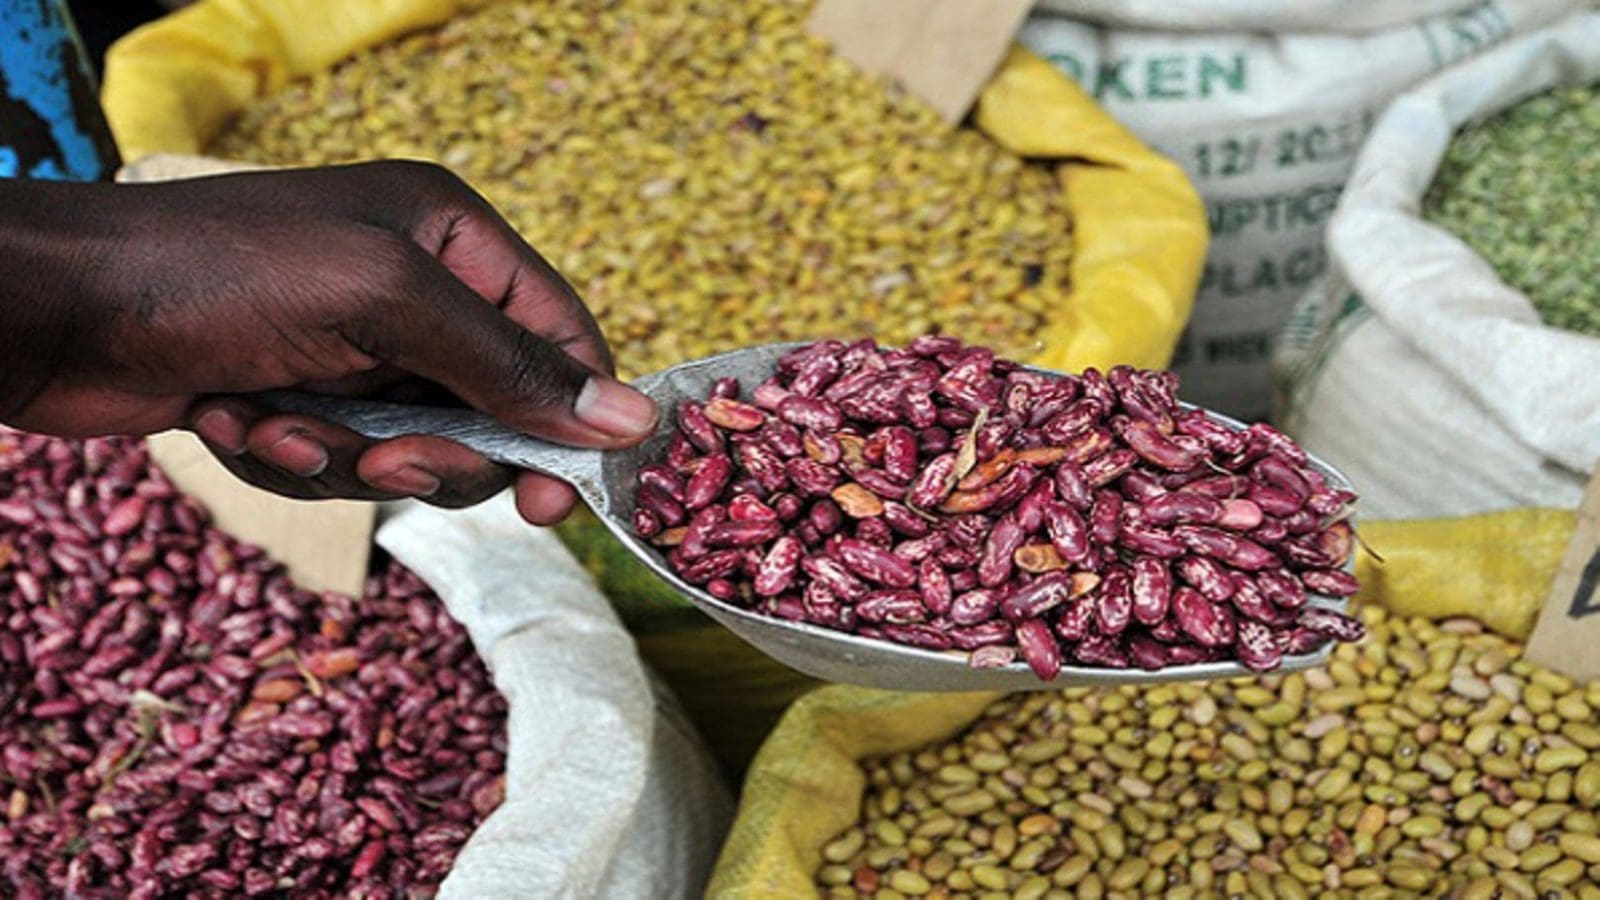 Bean scarcity in Uganda drives retail prices alarmingly high amid overwhelming demand